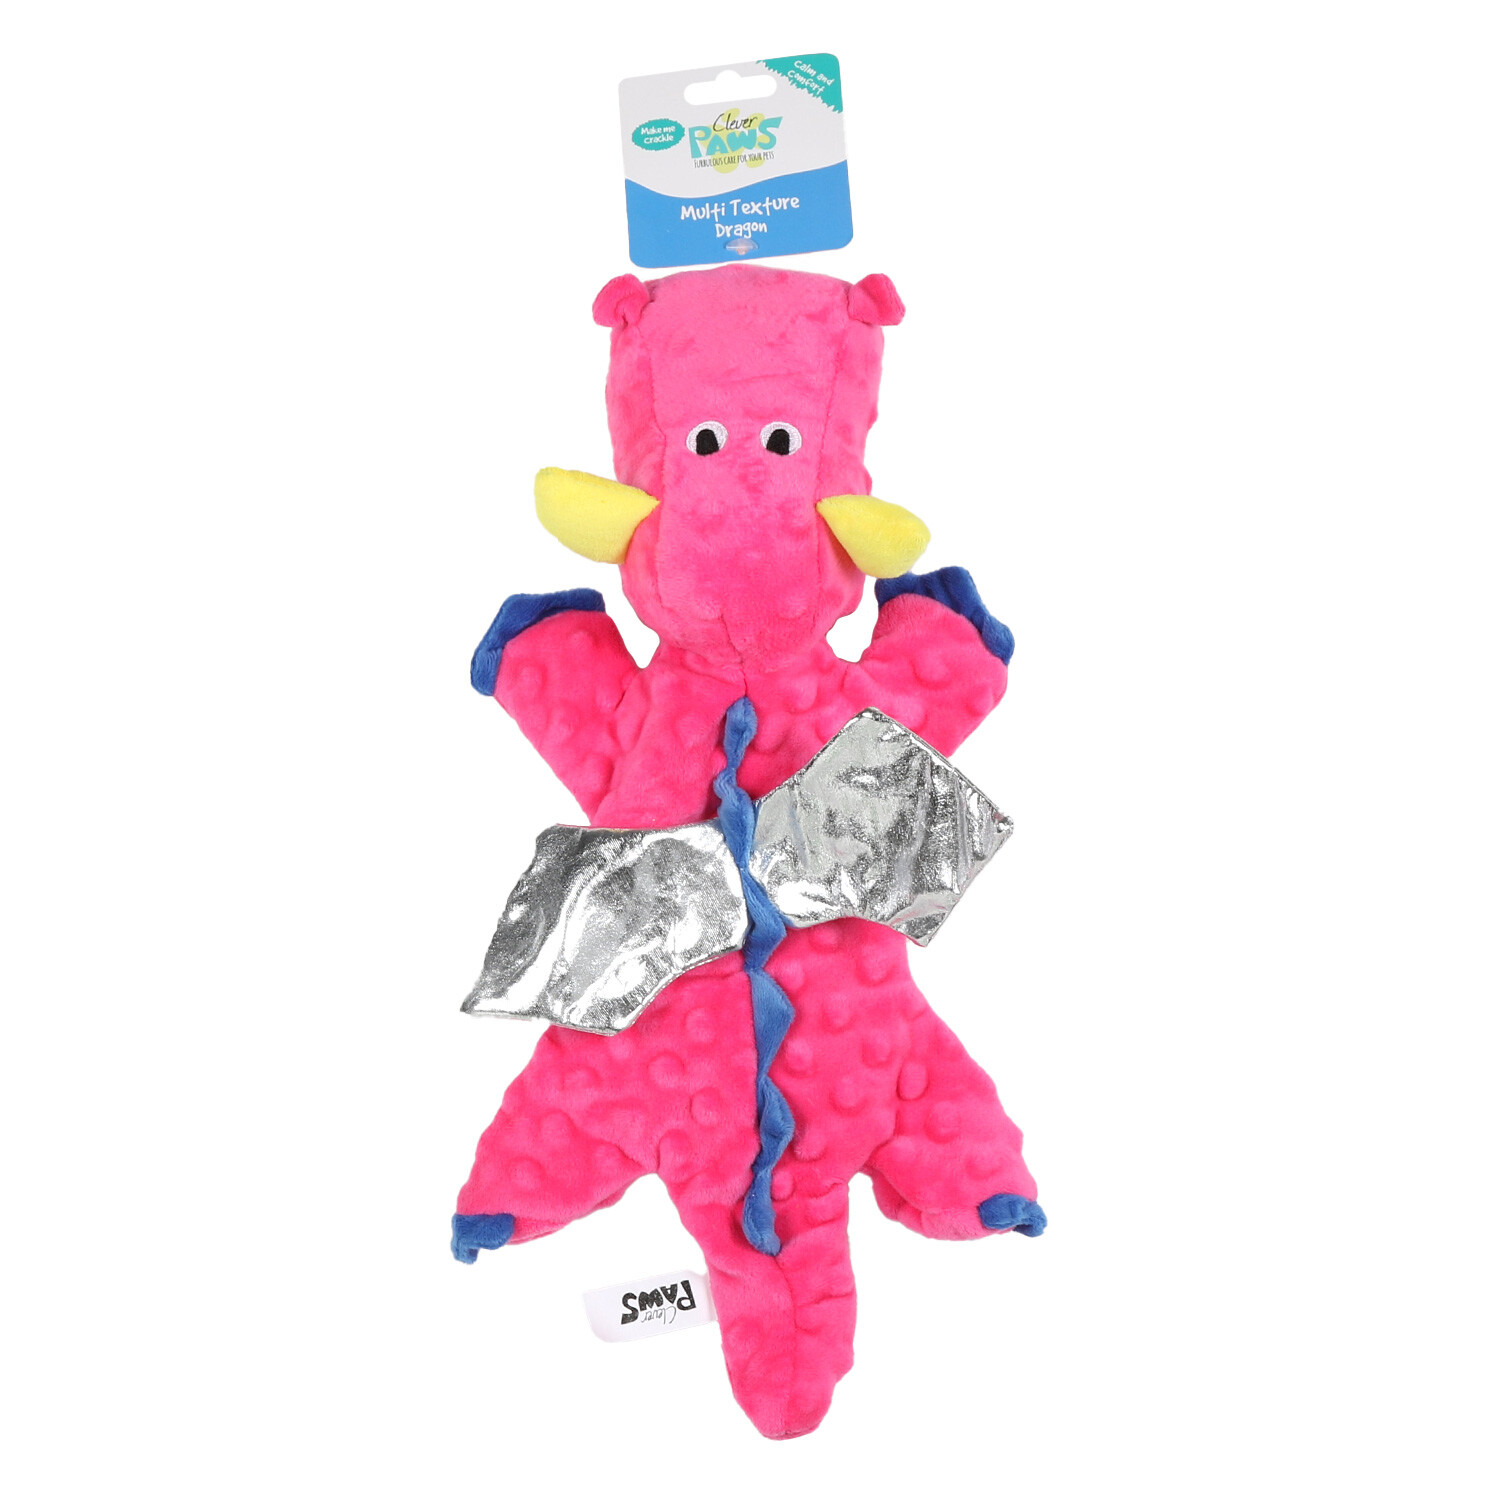 Single Clever Paws Multi Textured Dragon Dog Toy in Assorted styles Image 3